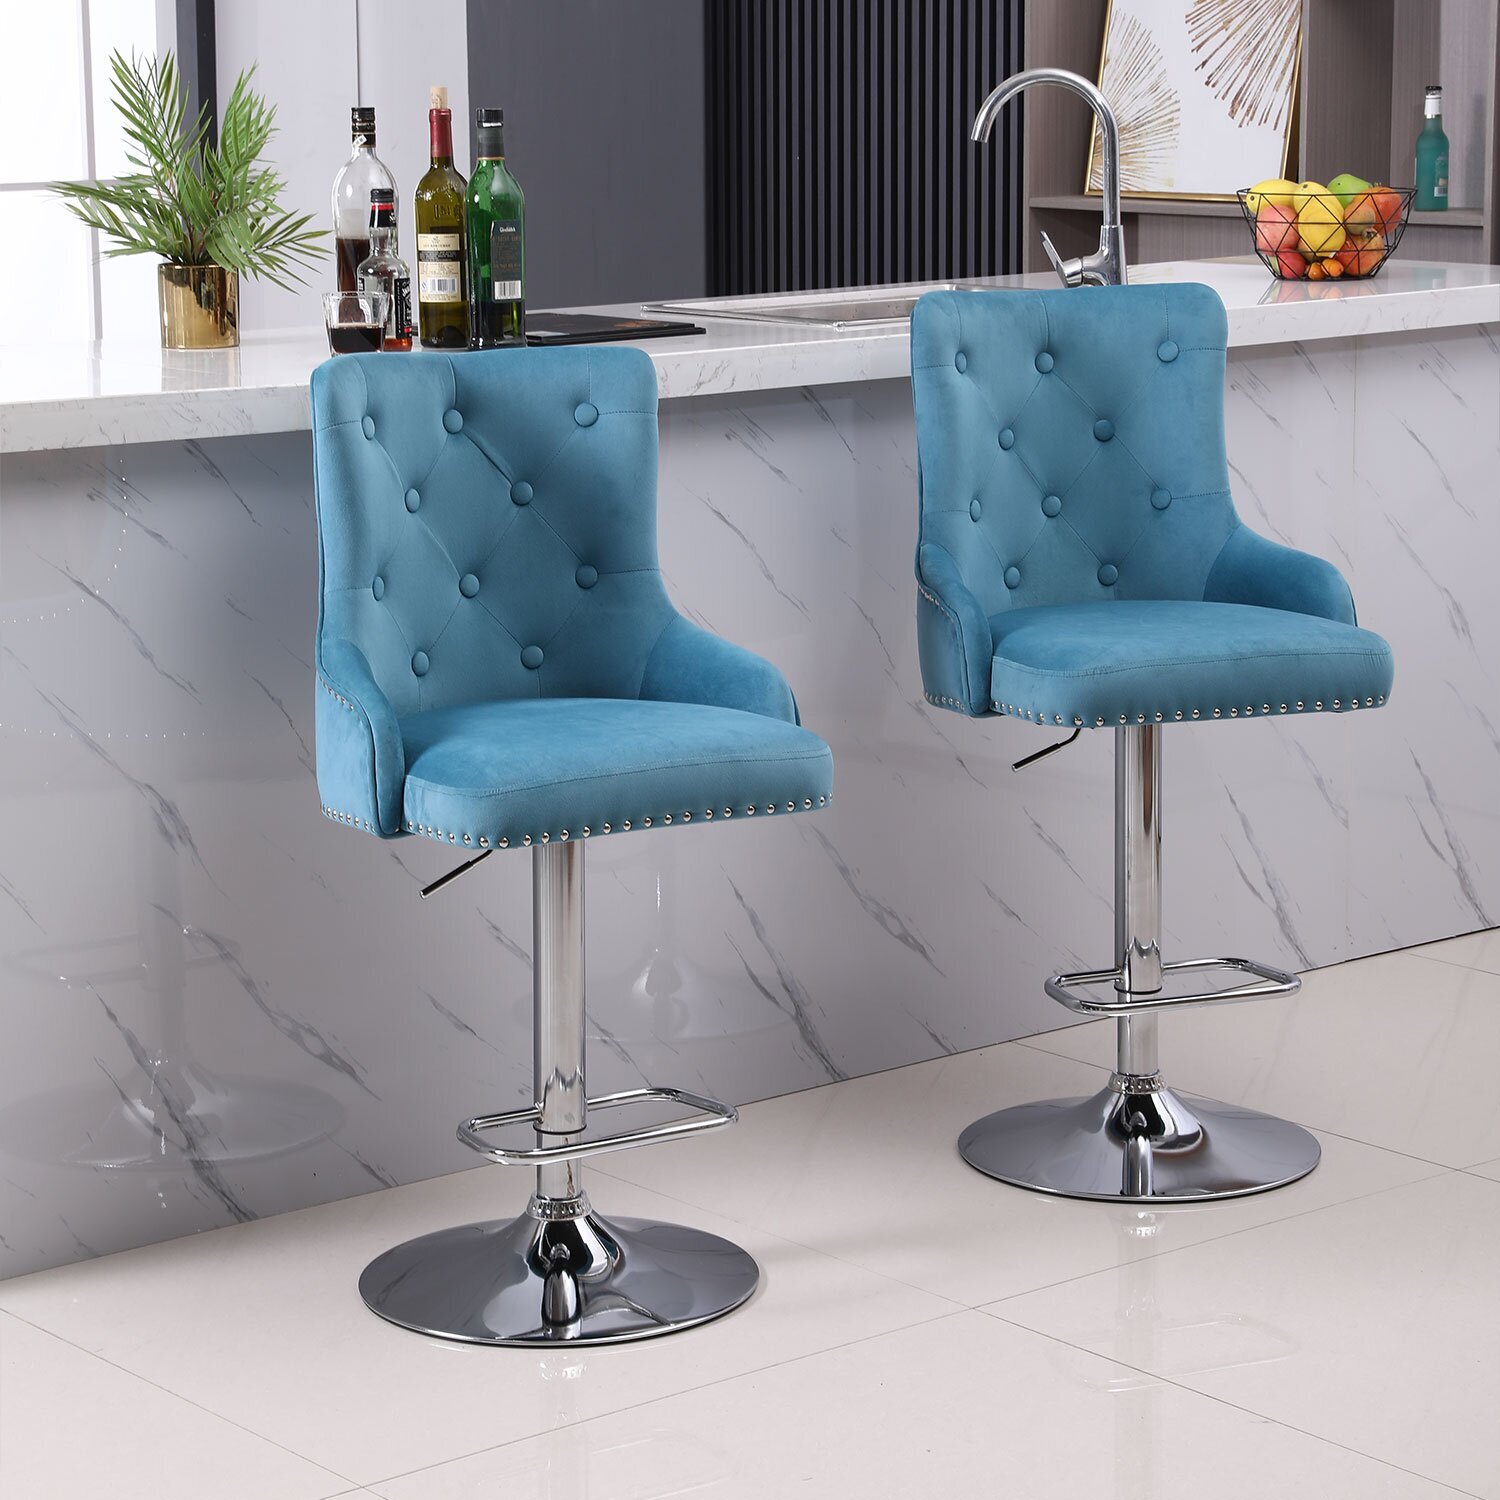 Plush velvet, high backed bar stools with backs and arms